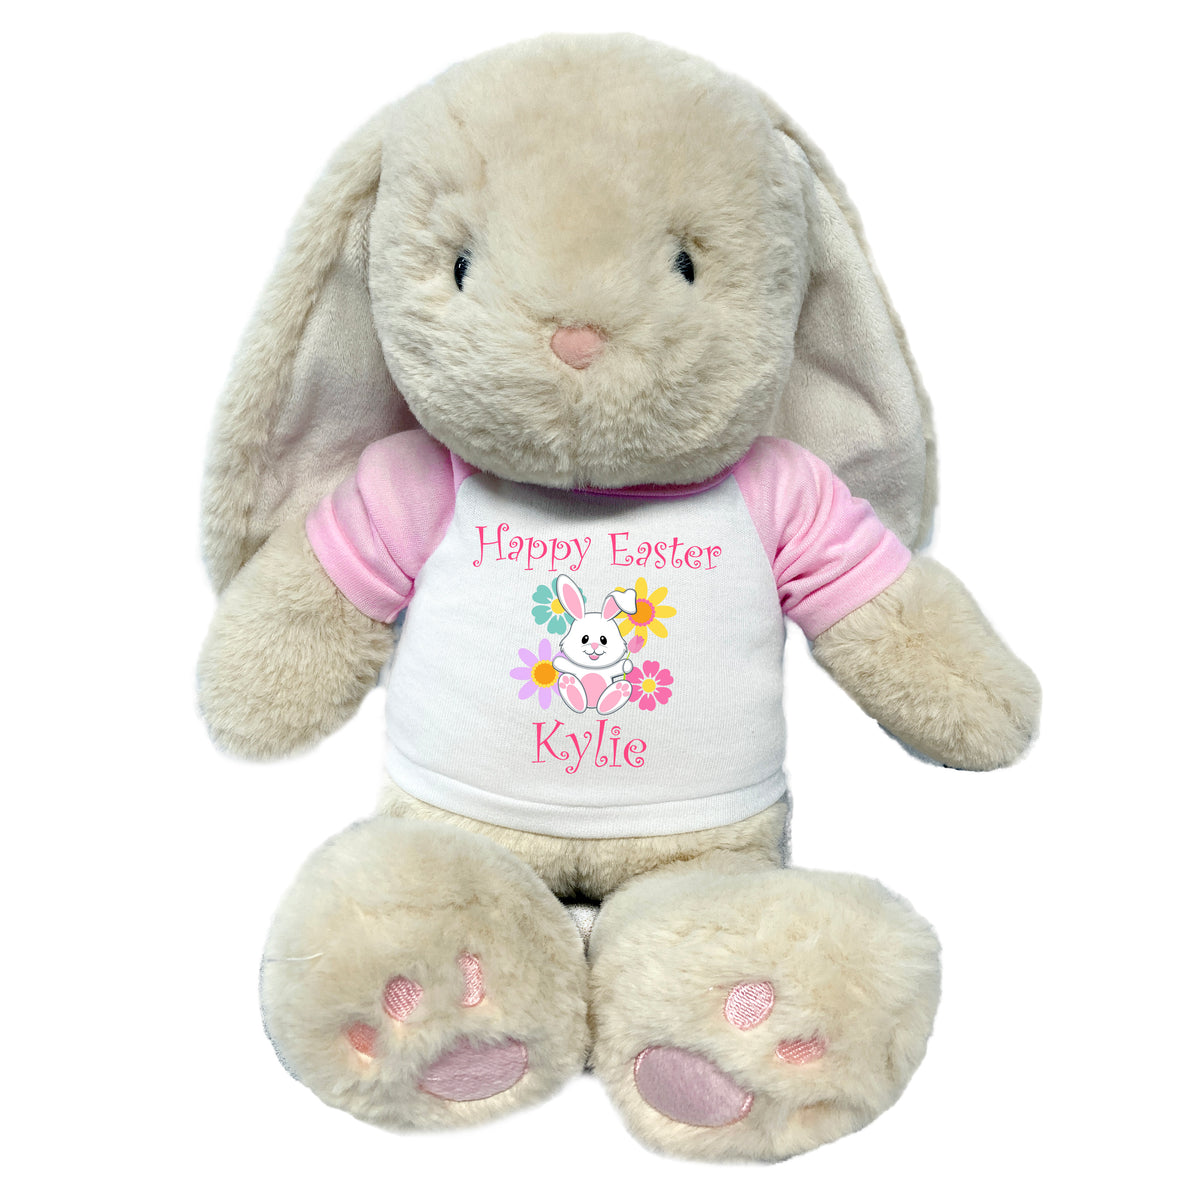 Personalized Easter Bunny - 14" Plush Creme Brulee Bunny Rabbit with Flower Design - Pink Shirt